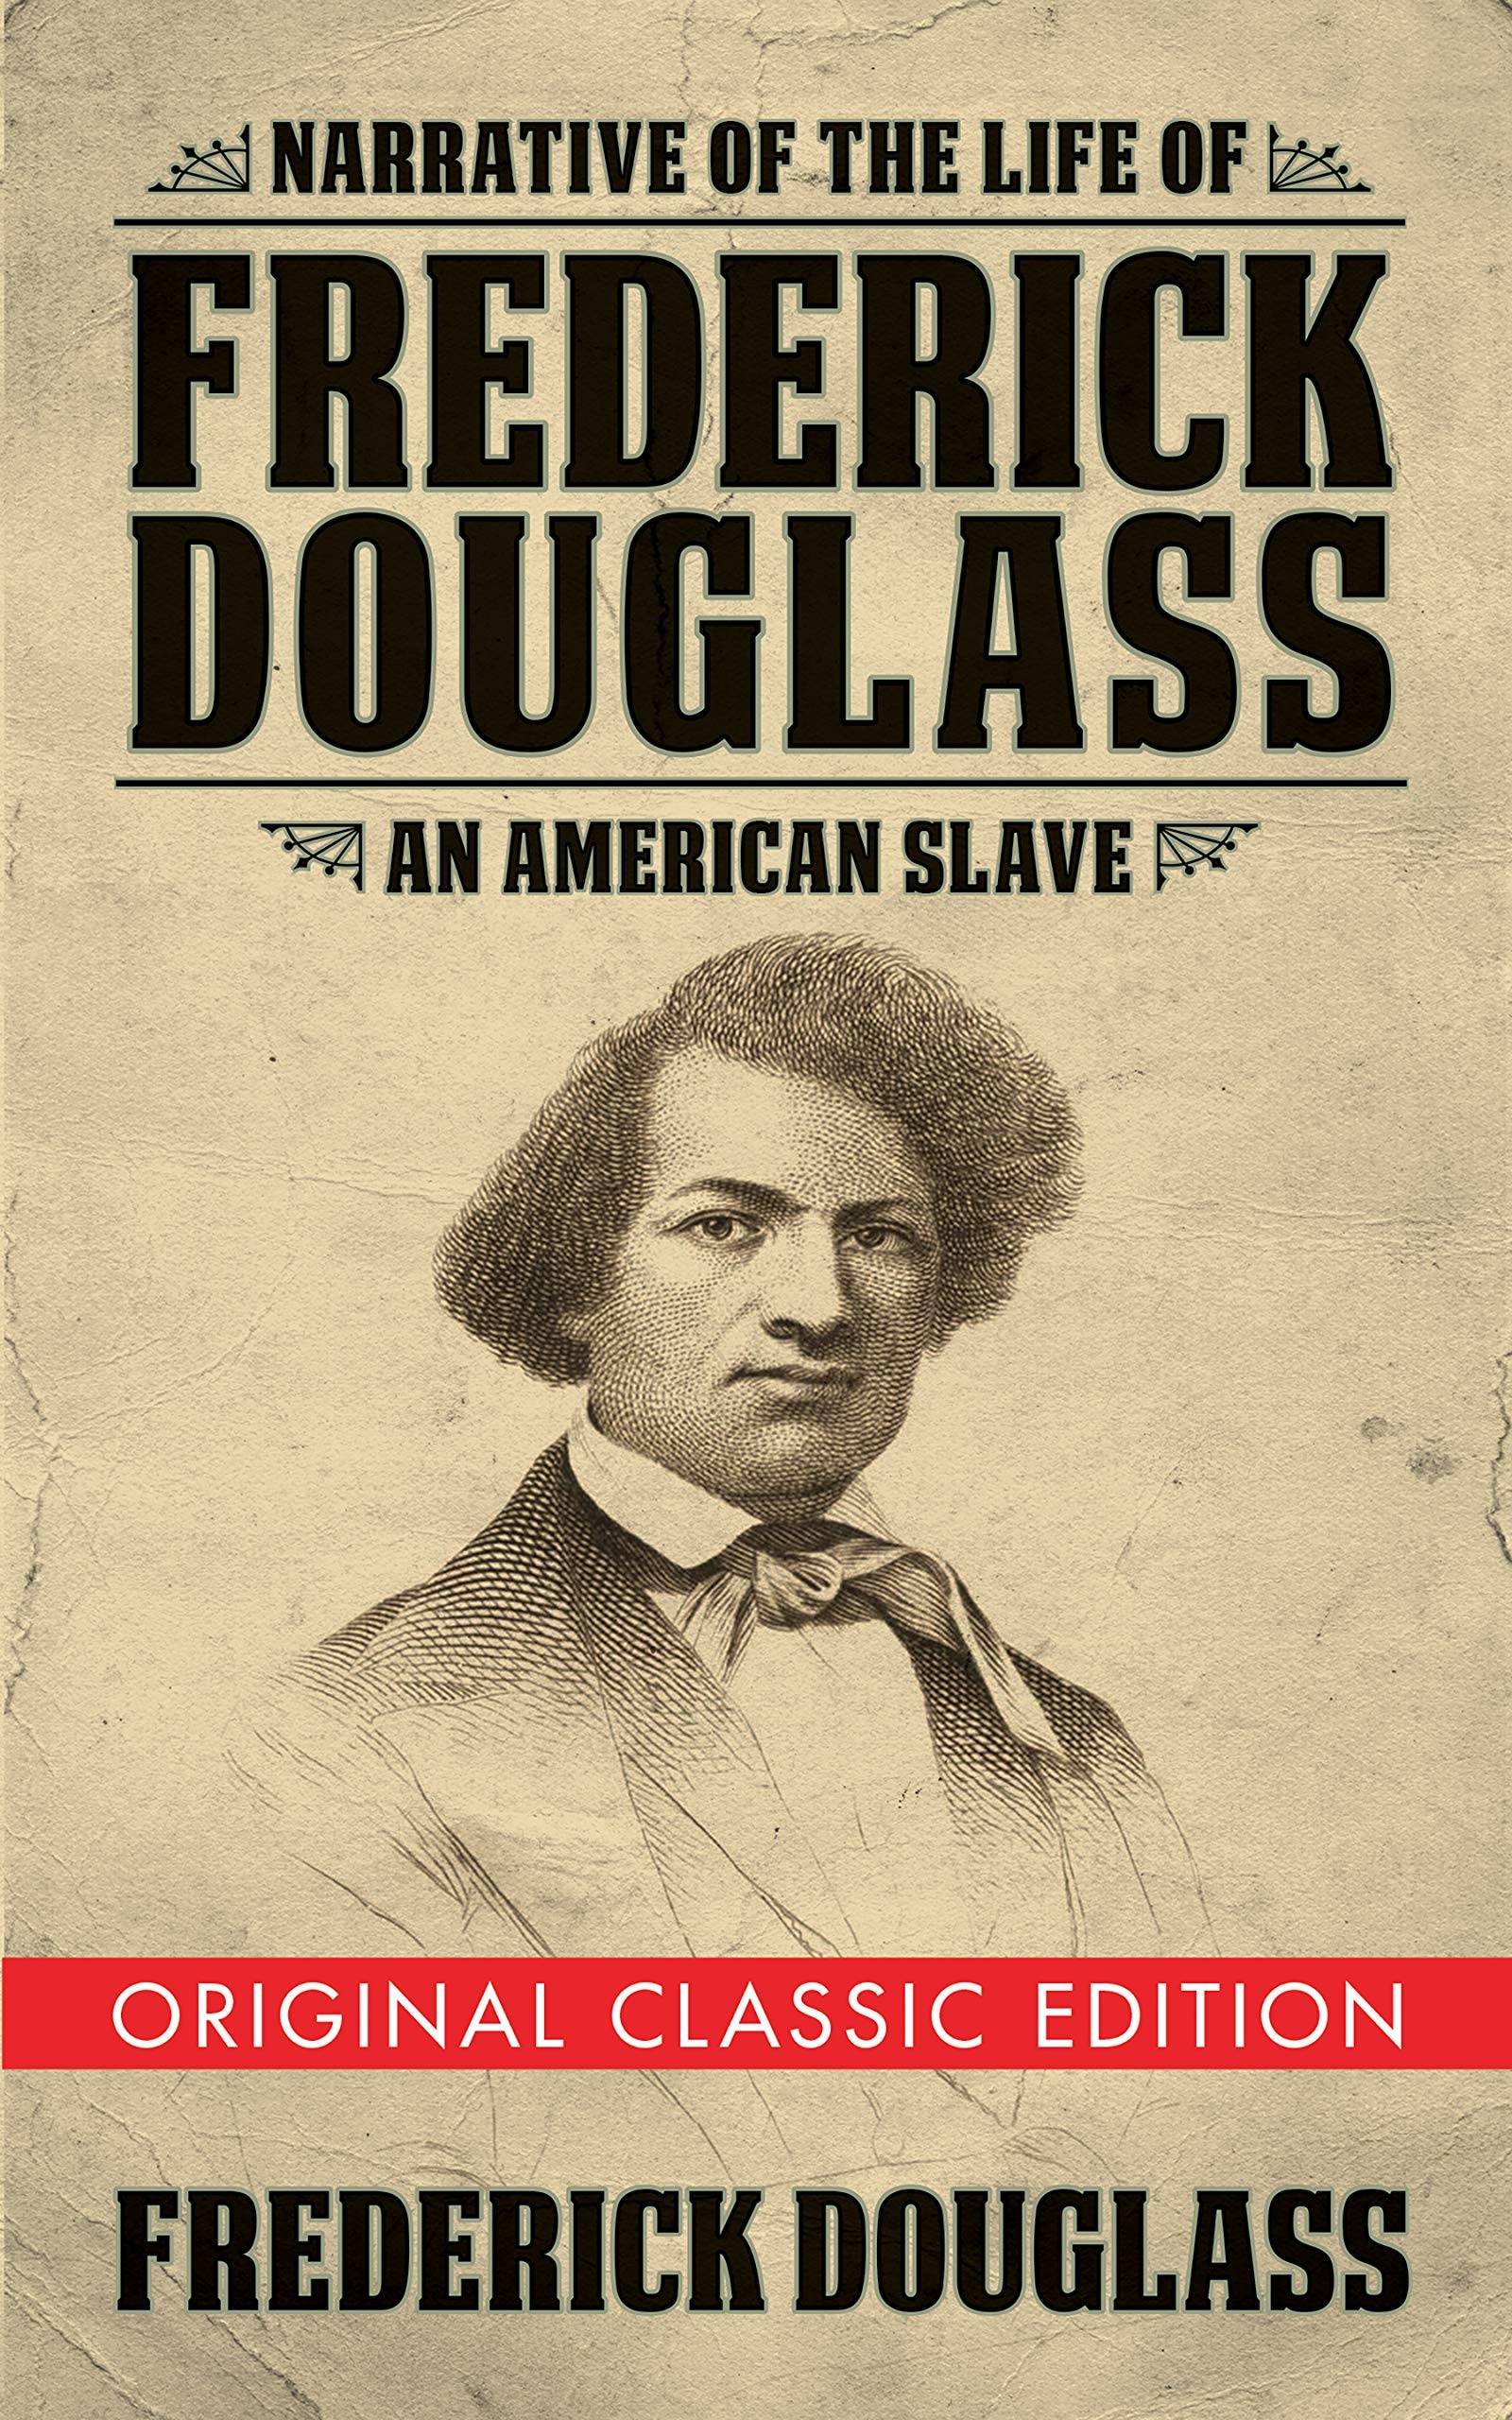 Book cover with pencil illustration of Frederick Douglas